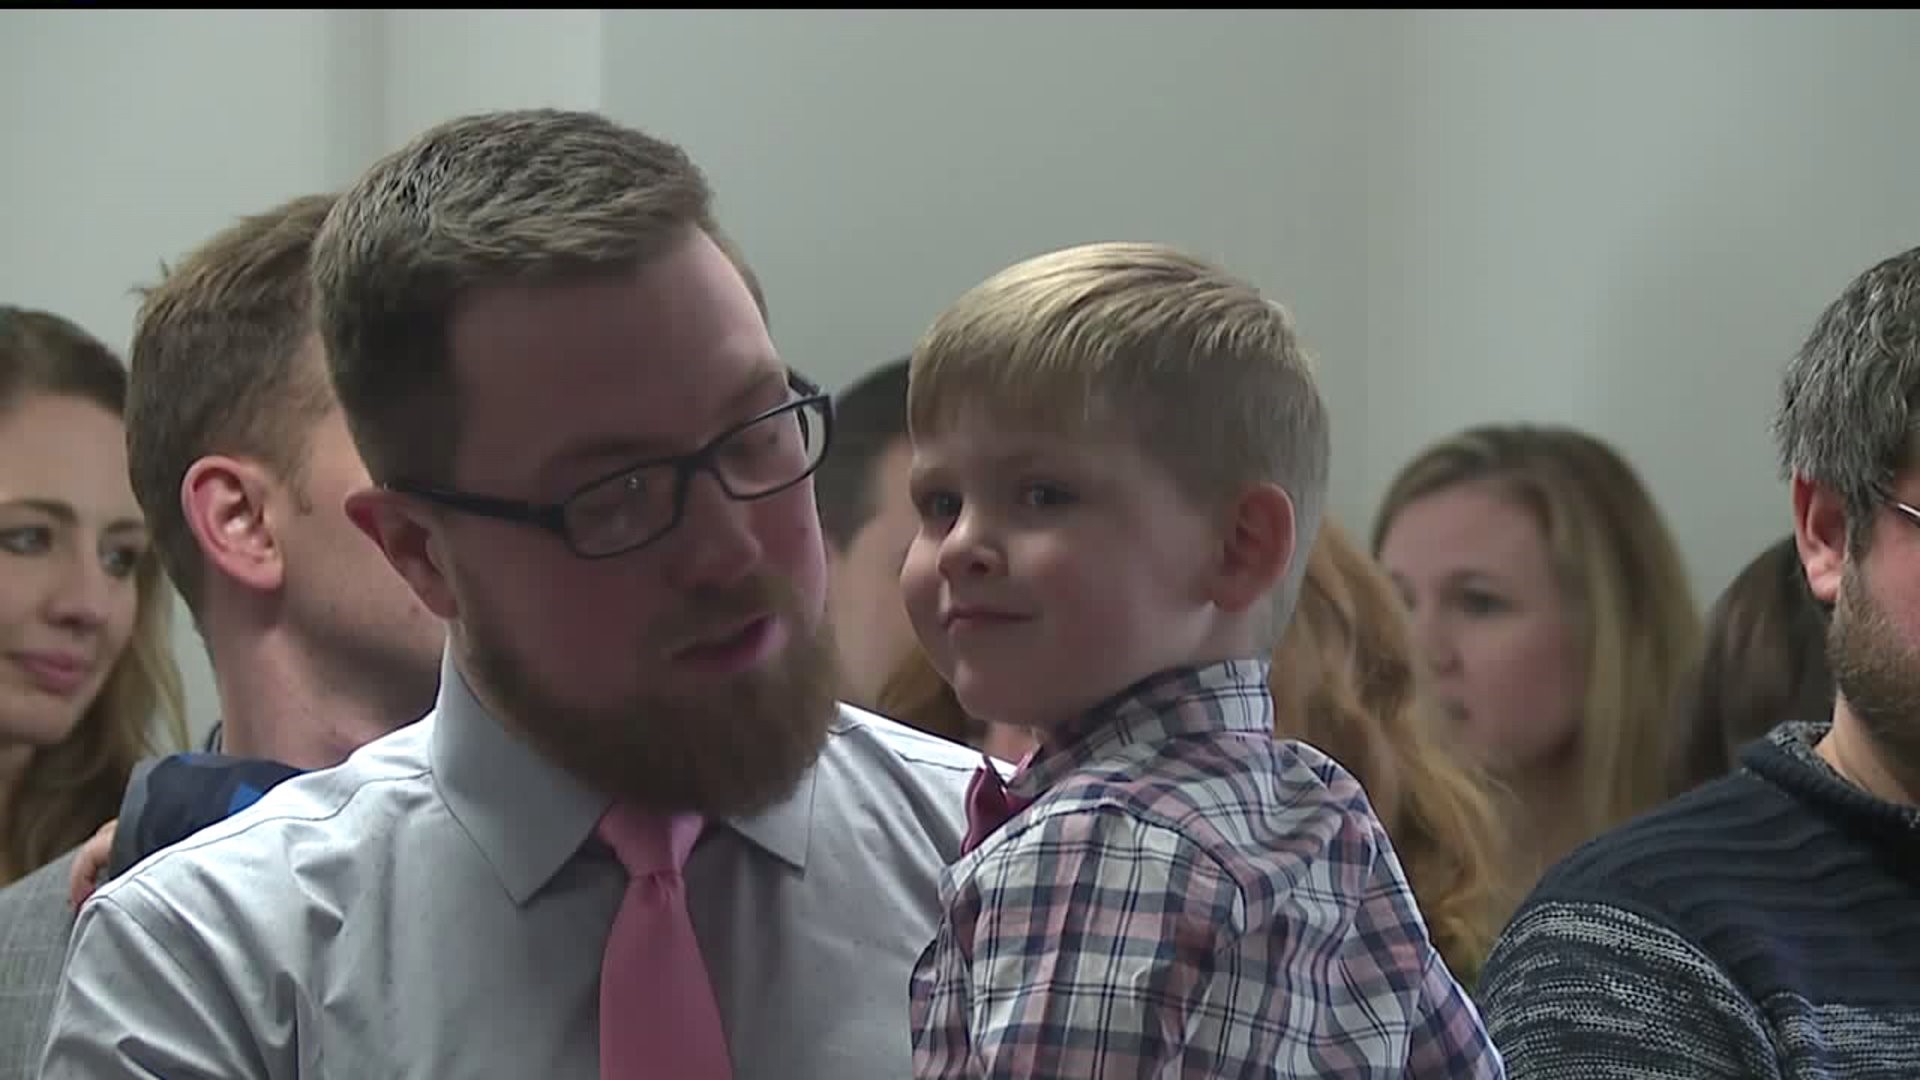 Scott County District Court celebrates National Adoption Day by finding homes for 14 kids